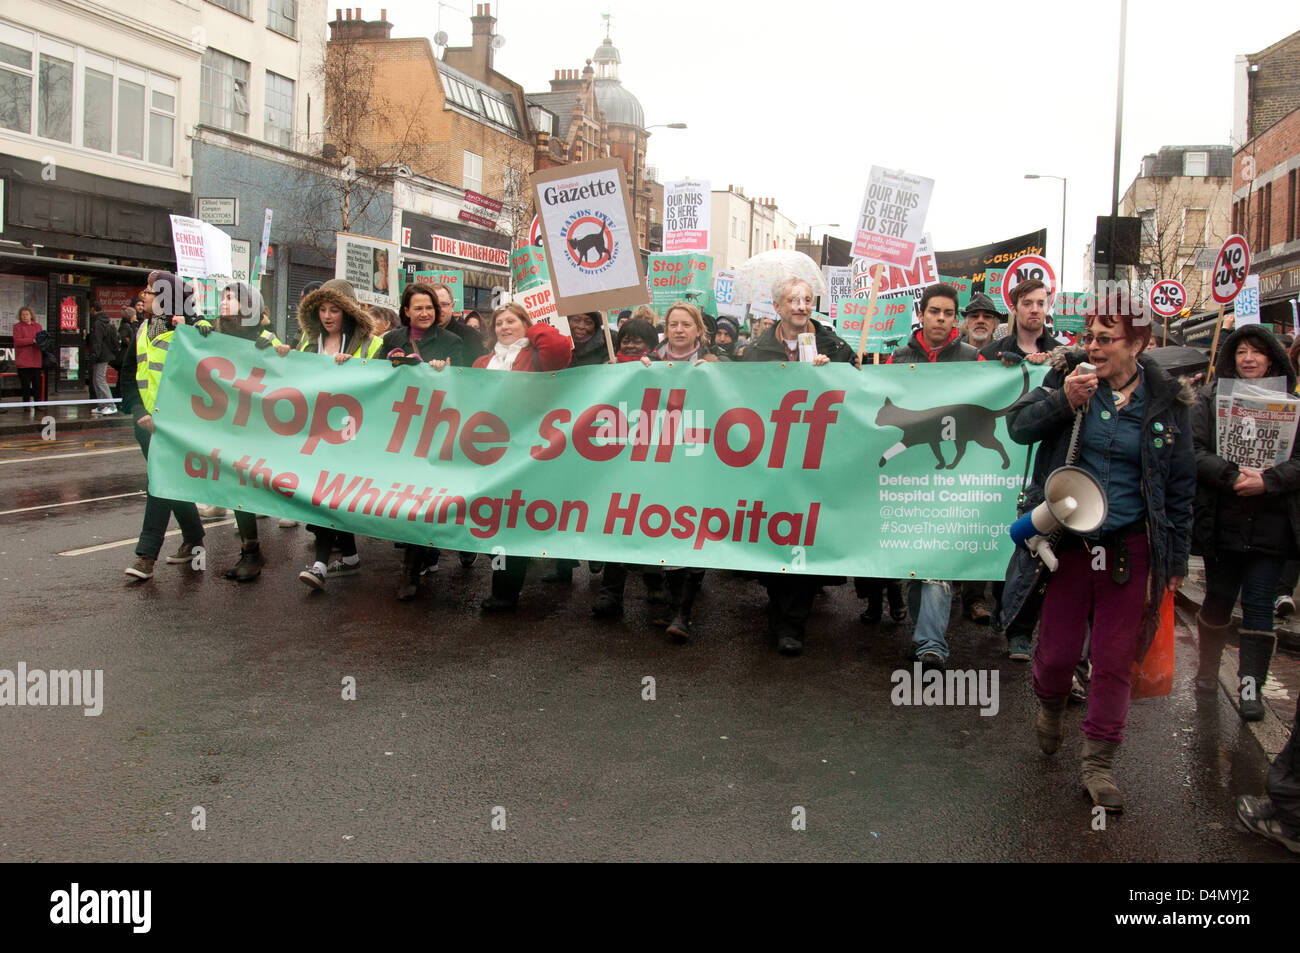 London UK, 16th March 2013. Thousands of people campaigning to stop the cuts at the Whittington Hospital march through an overcast, rainy Islington before arriving at the Hospital itself. The board of the Whittington Hospital Trust have controversial plans for budget cuts, which include selling off one third of the site, closing beds and services and losing over five hundred jobs. Stock Photo